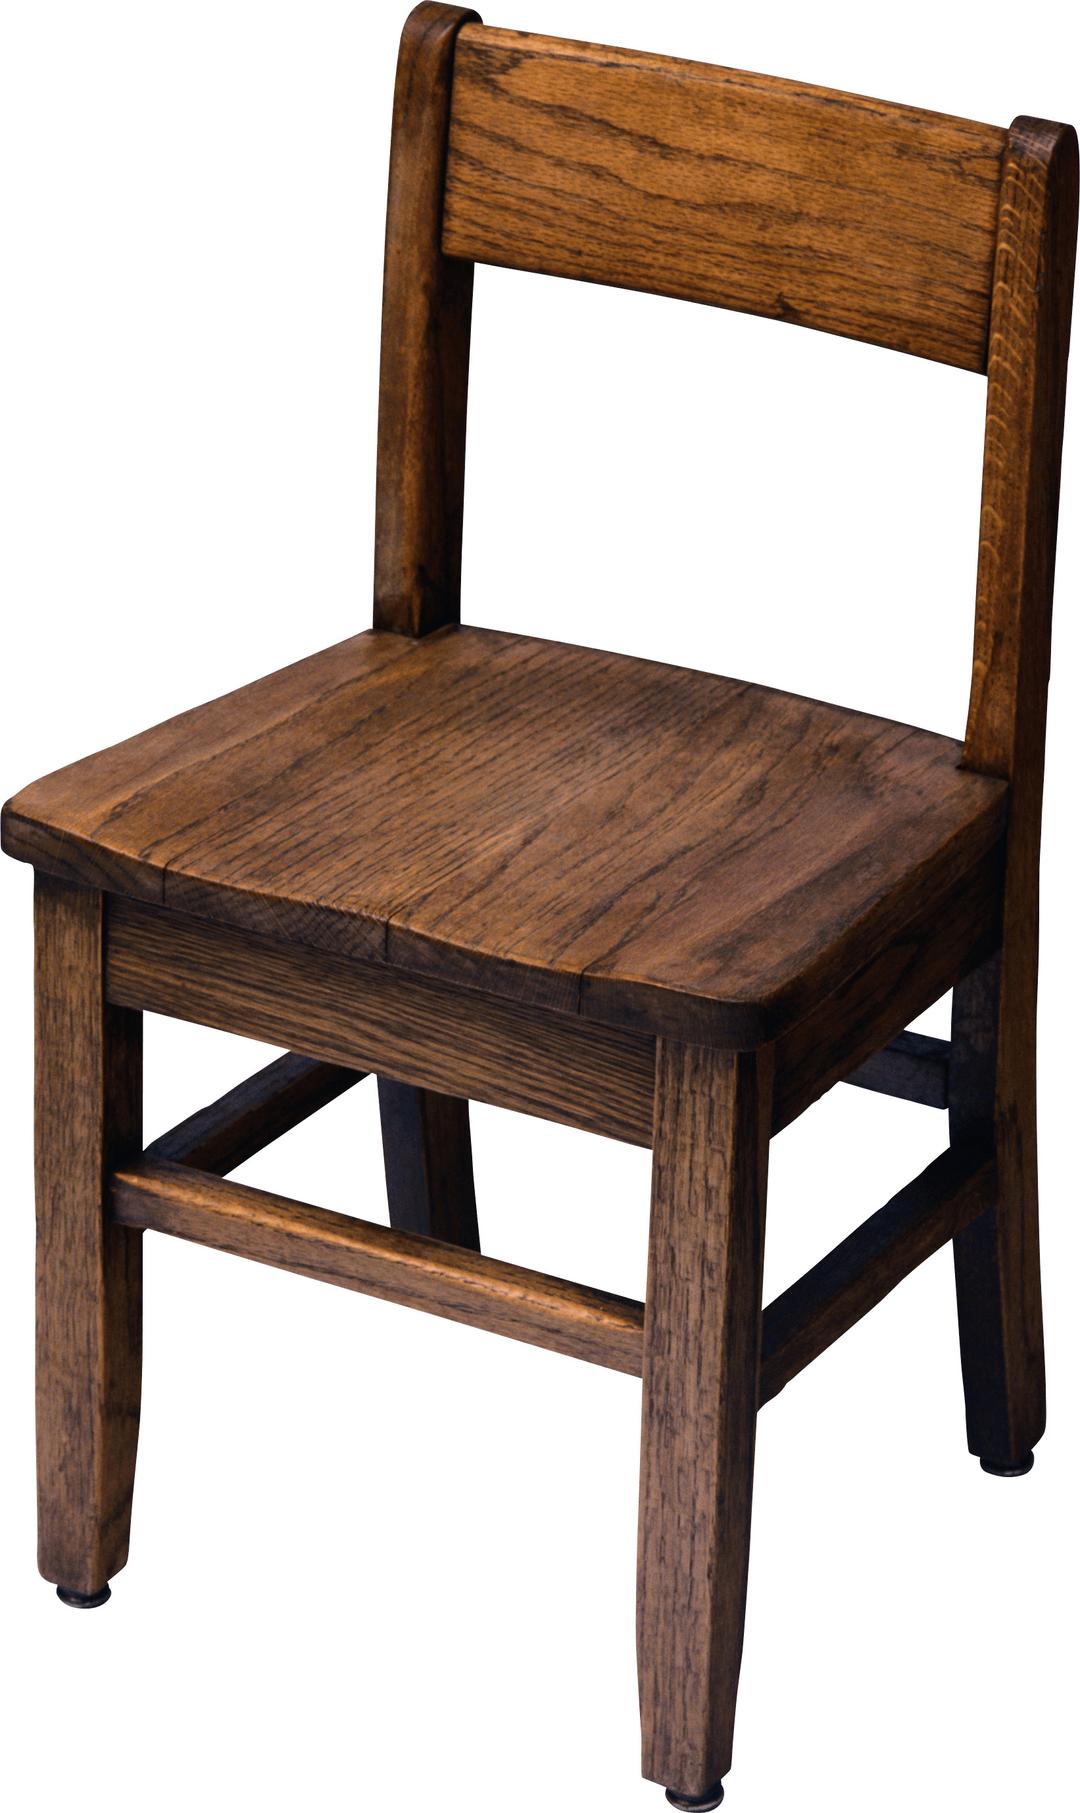 Old Wooden Chair png transparent